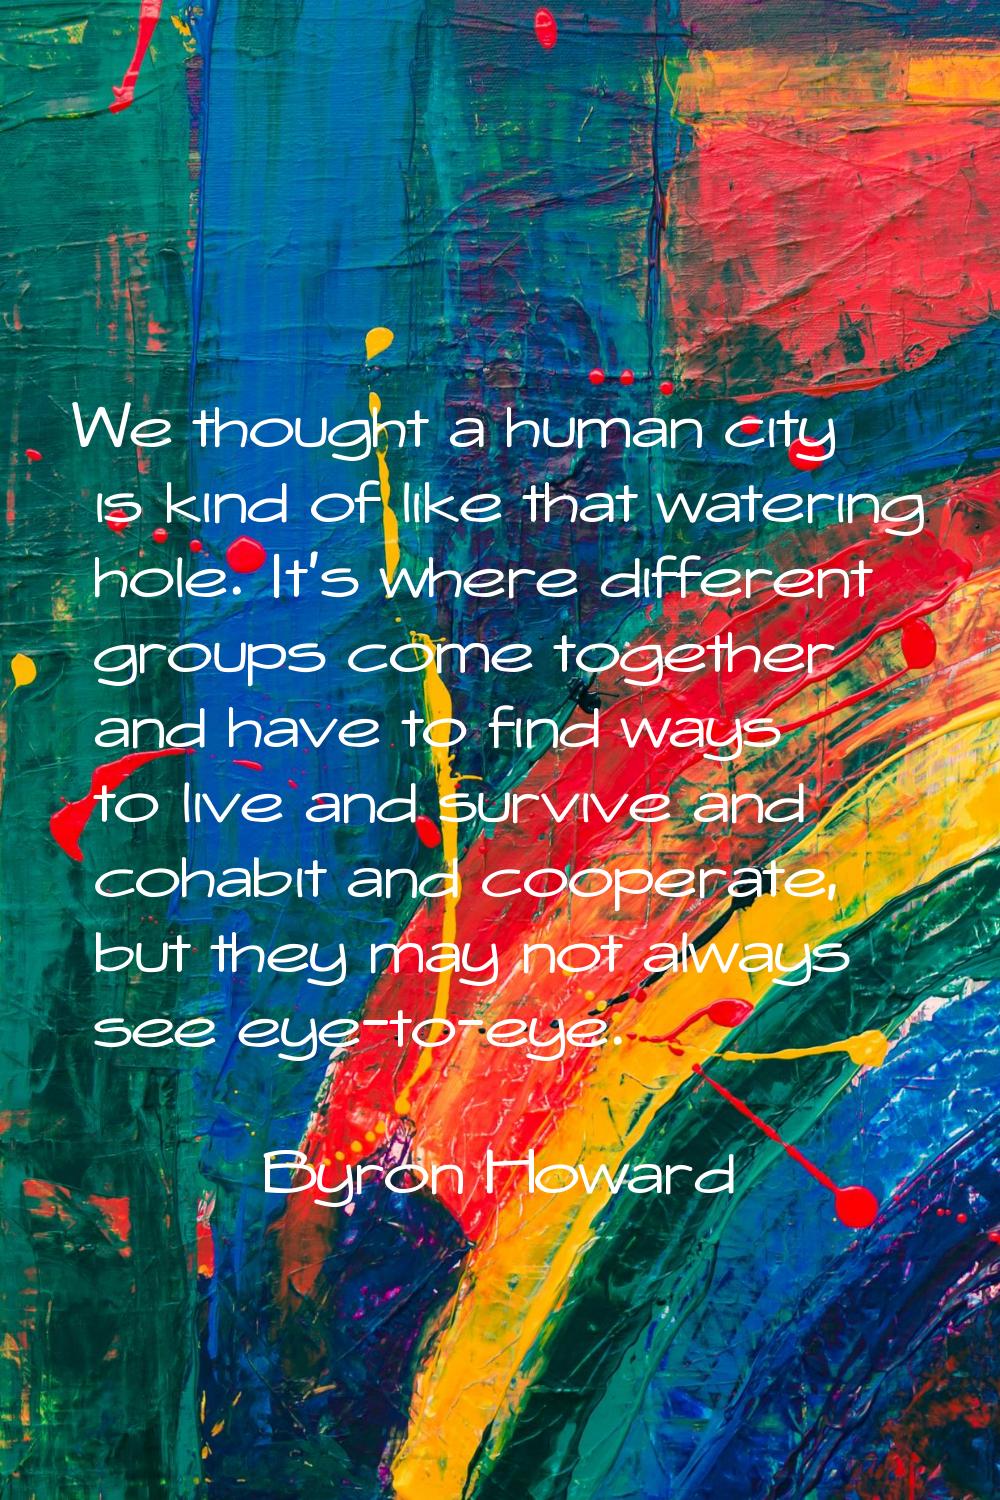 We thought a human city is kind of like that watering hole. It's where different groups come togeth